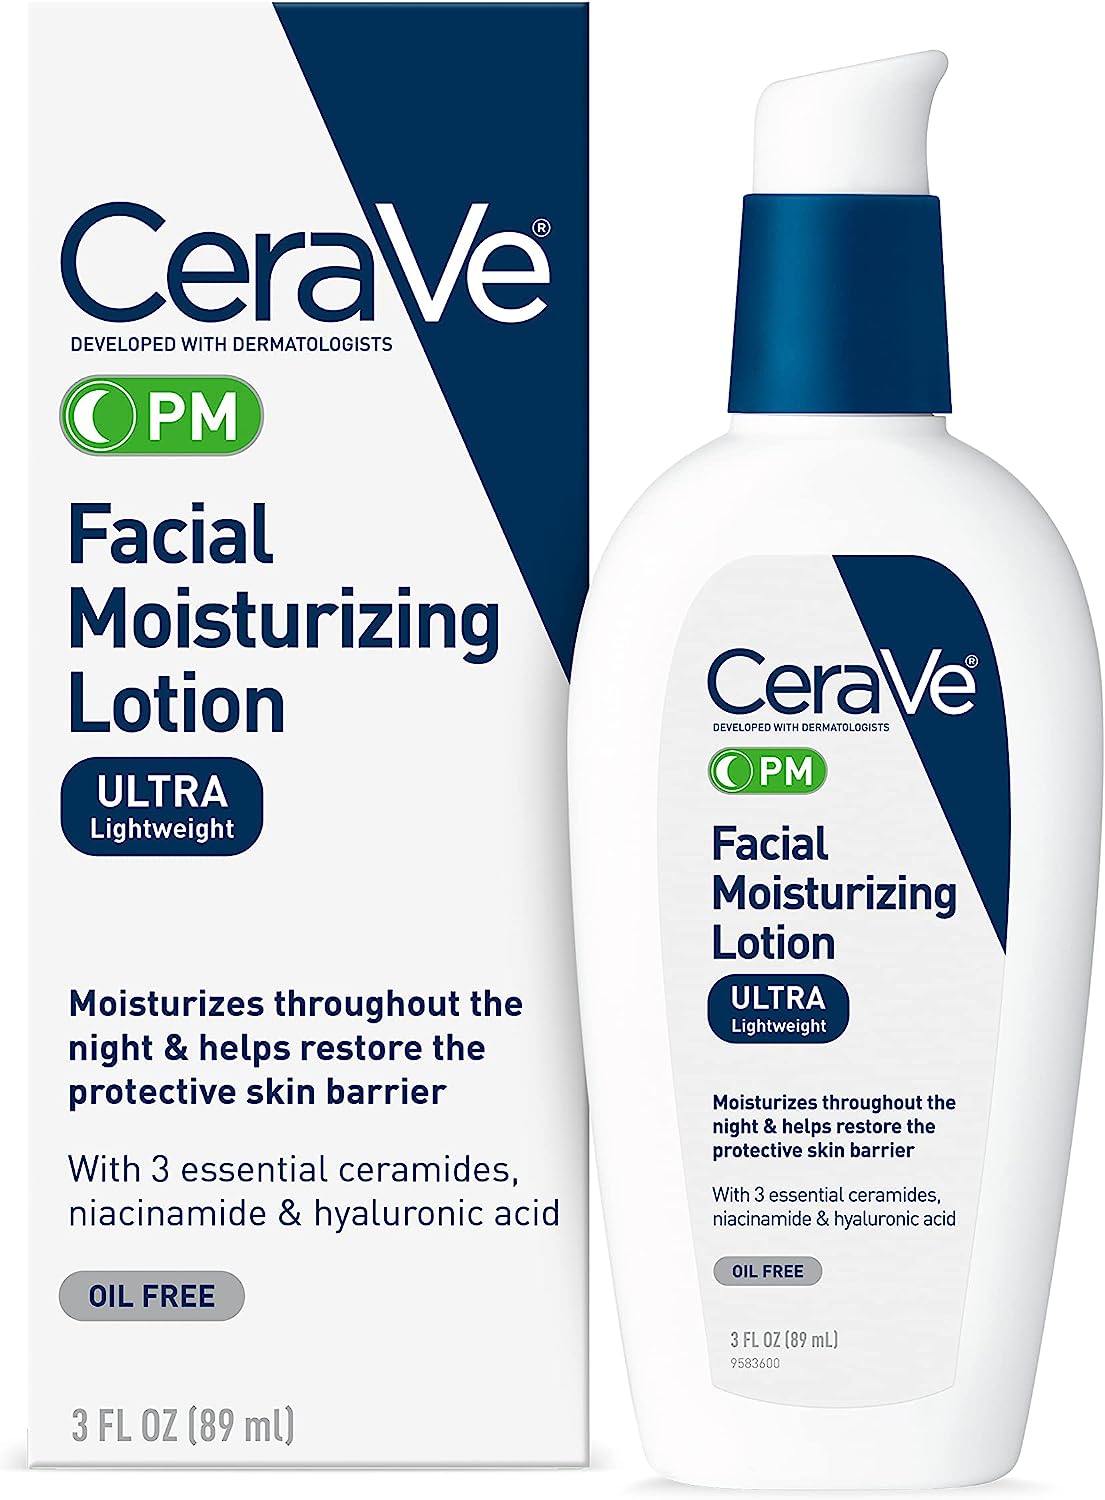 CeraVe Facial Moisturizing Lotion AM SPF 30, 3 oz, Daily Face Moisturizer with SPF, Packaging May Vary